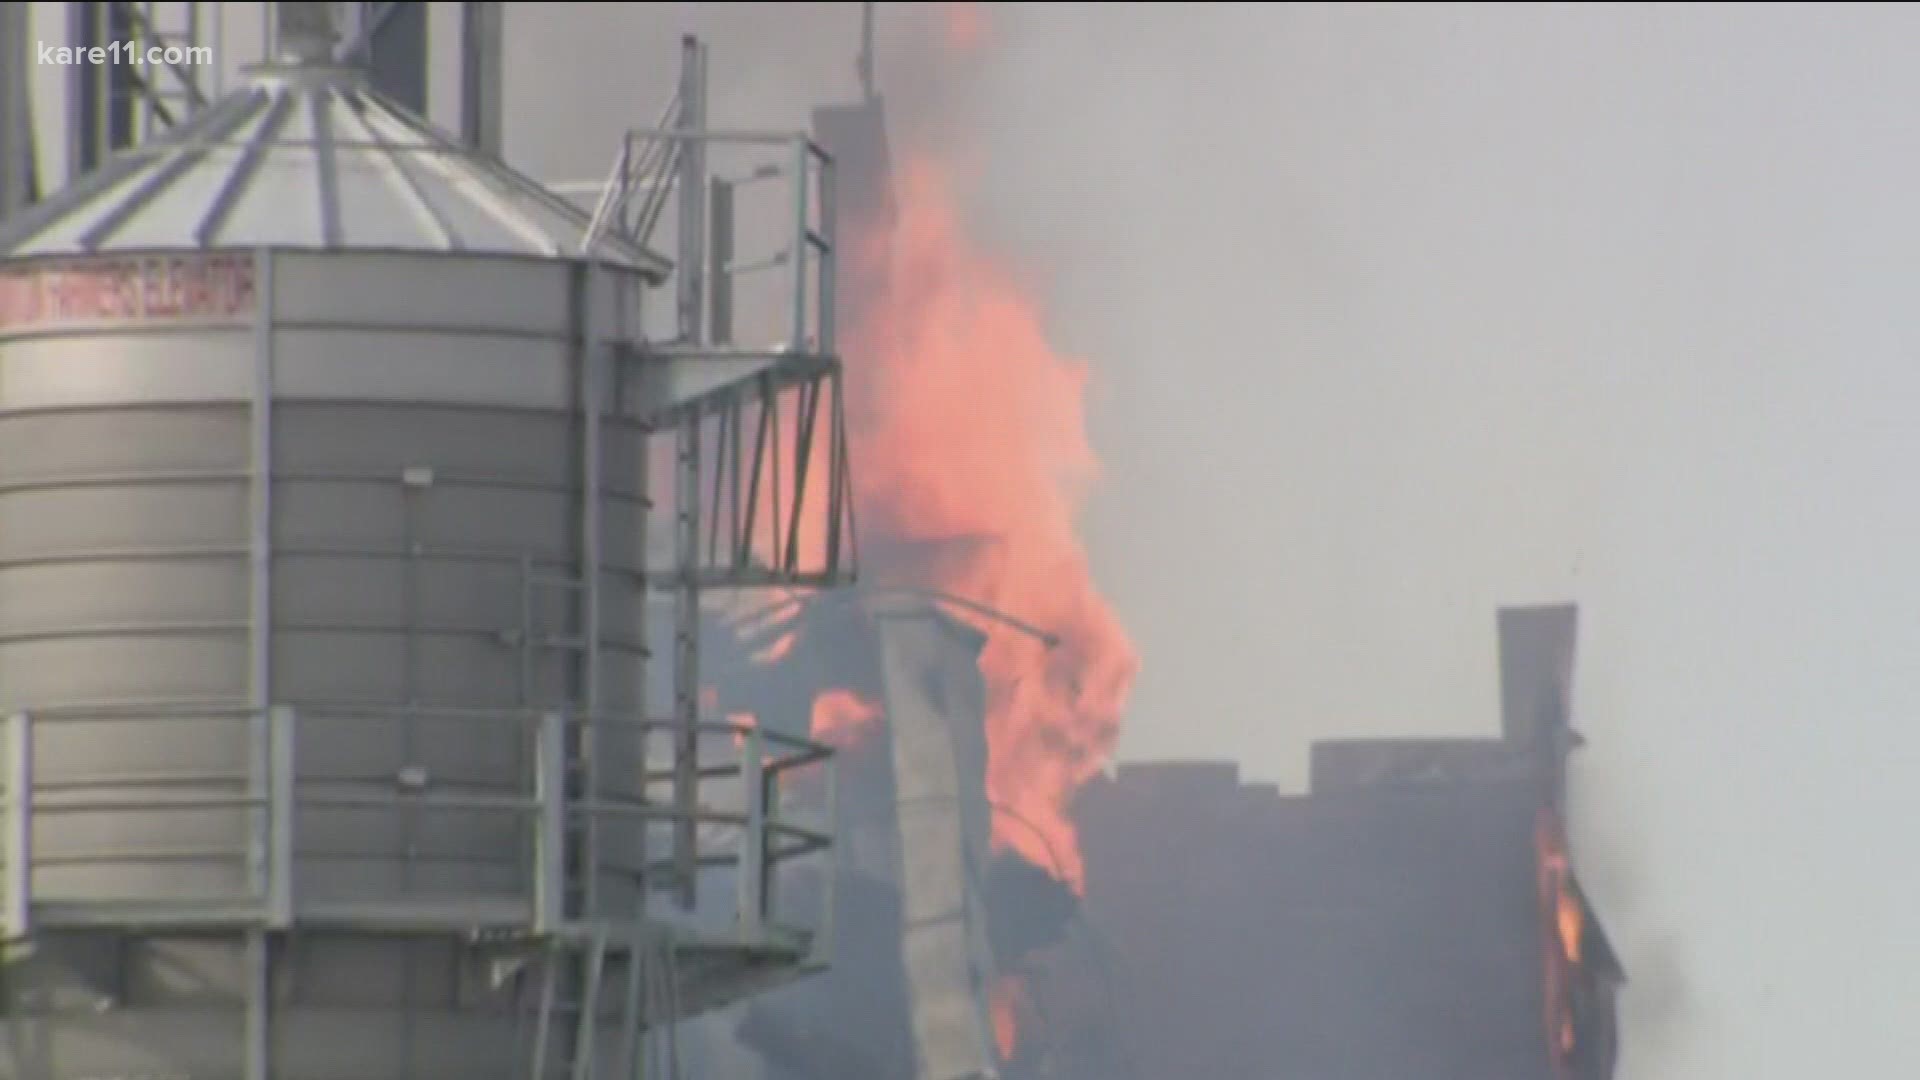 Authorities asked anyone living within three blocks of the grain elevator to evacuate immediately.